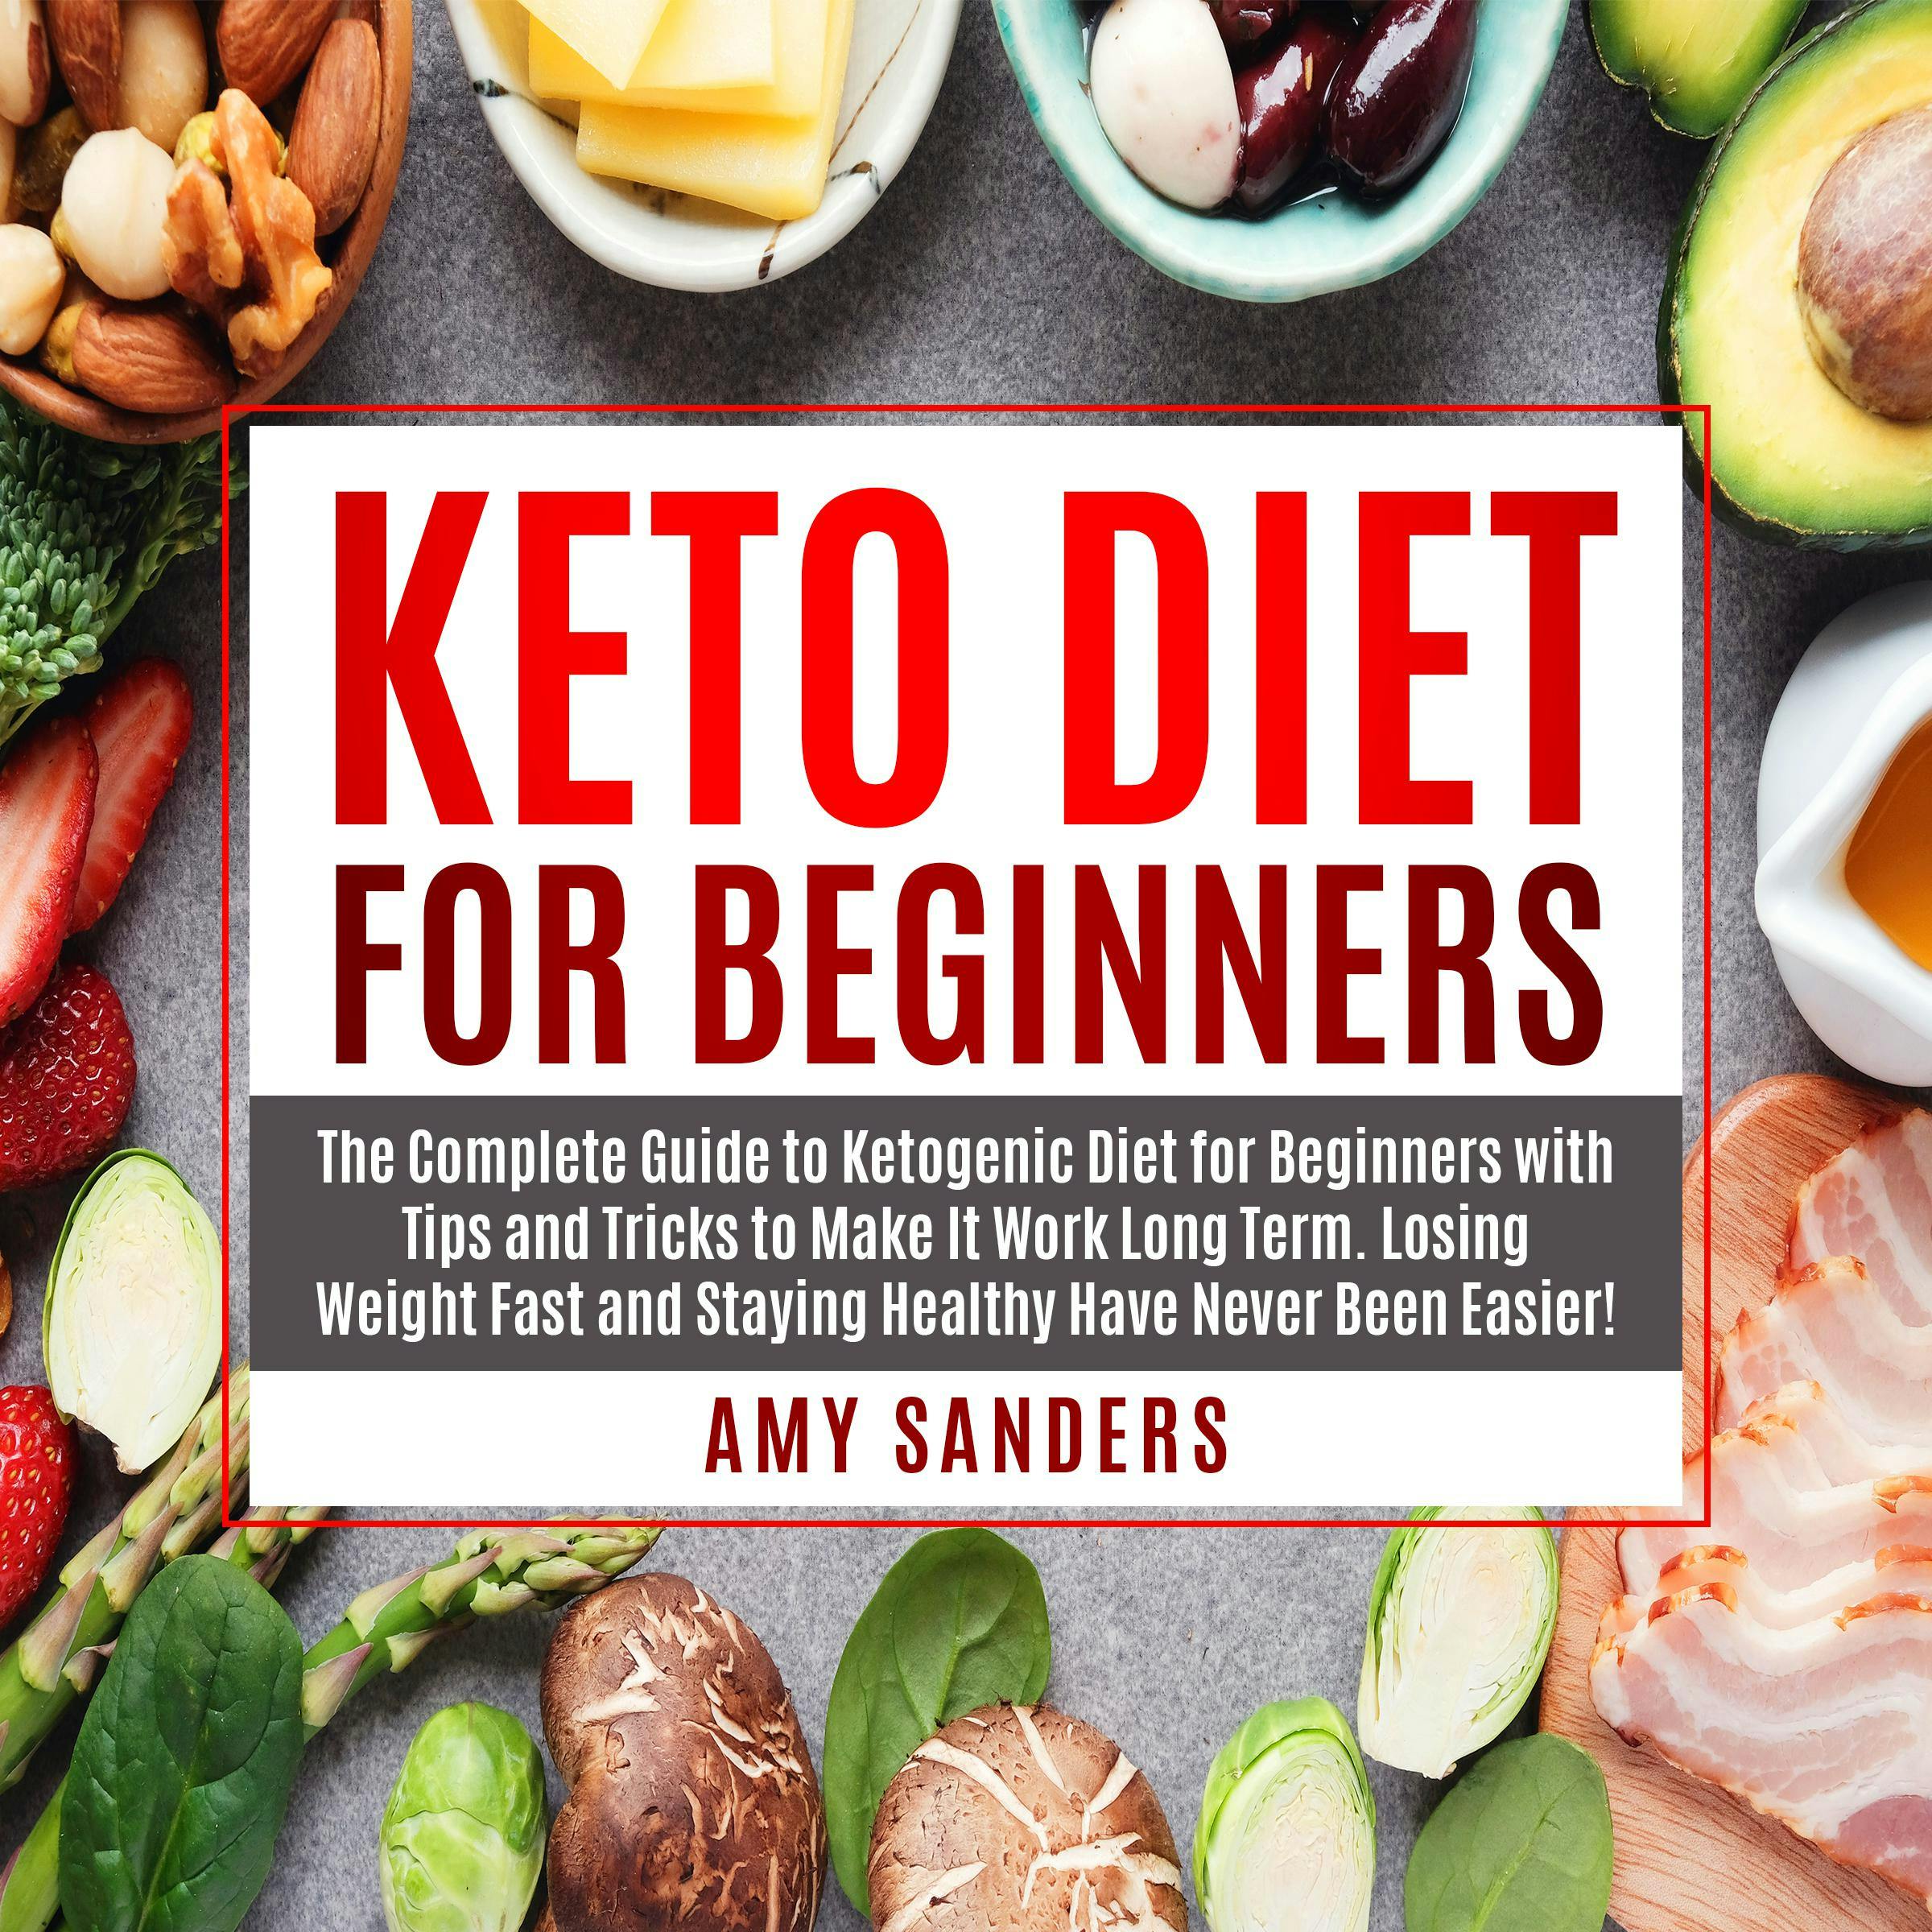 Keto Diet For Beginners: The Complete Guide to Ketogenic Diet for Beginners with Tips and Tricks to Make It Work Long Term. Losing Weight Fast and Staying Healthy Have Never Been - Amy Sanders